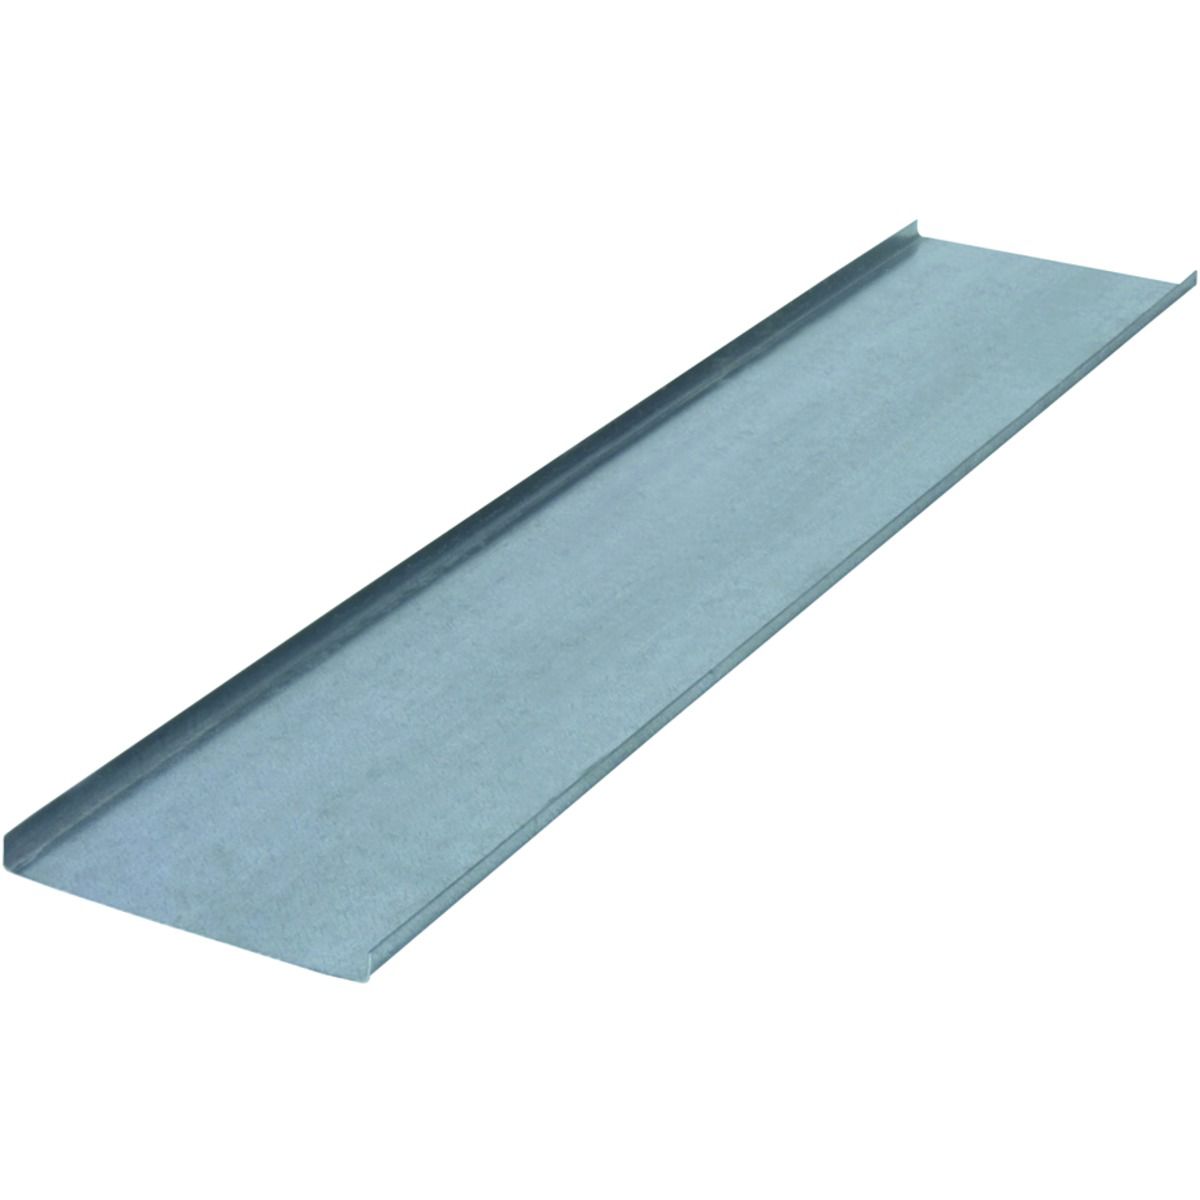 Image of Knauf Galvanised Metal Fixing Channel - 0.7mm x 96mm x 2.4m